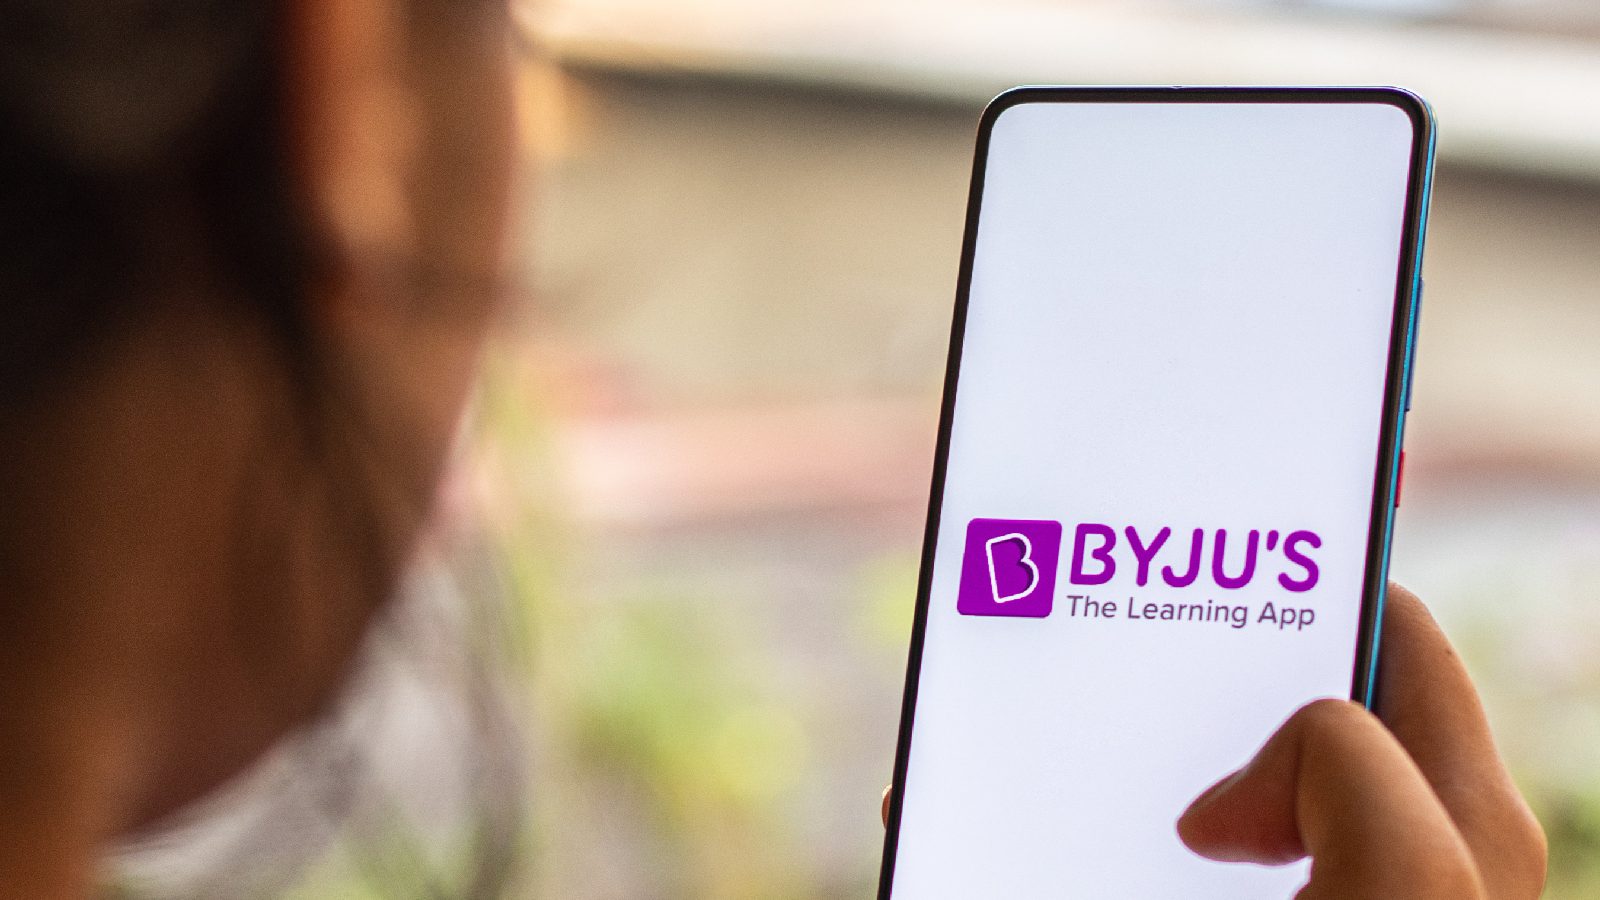 byju-s-to-take-rs-300-crore-unsecured-loan-from-subsidiary-aakash-educational-services-details-here